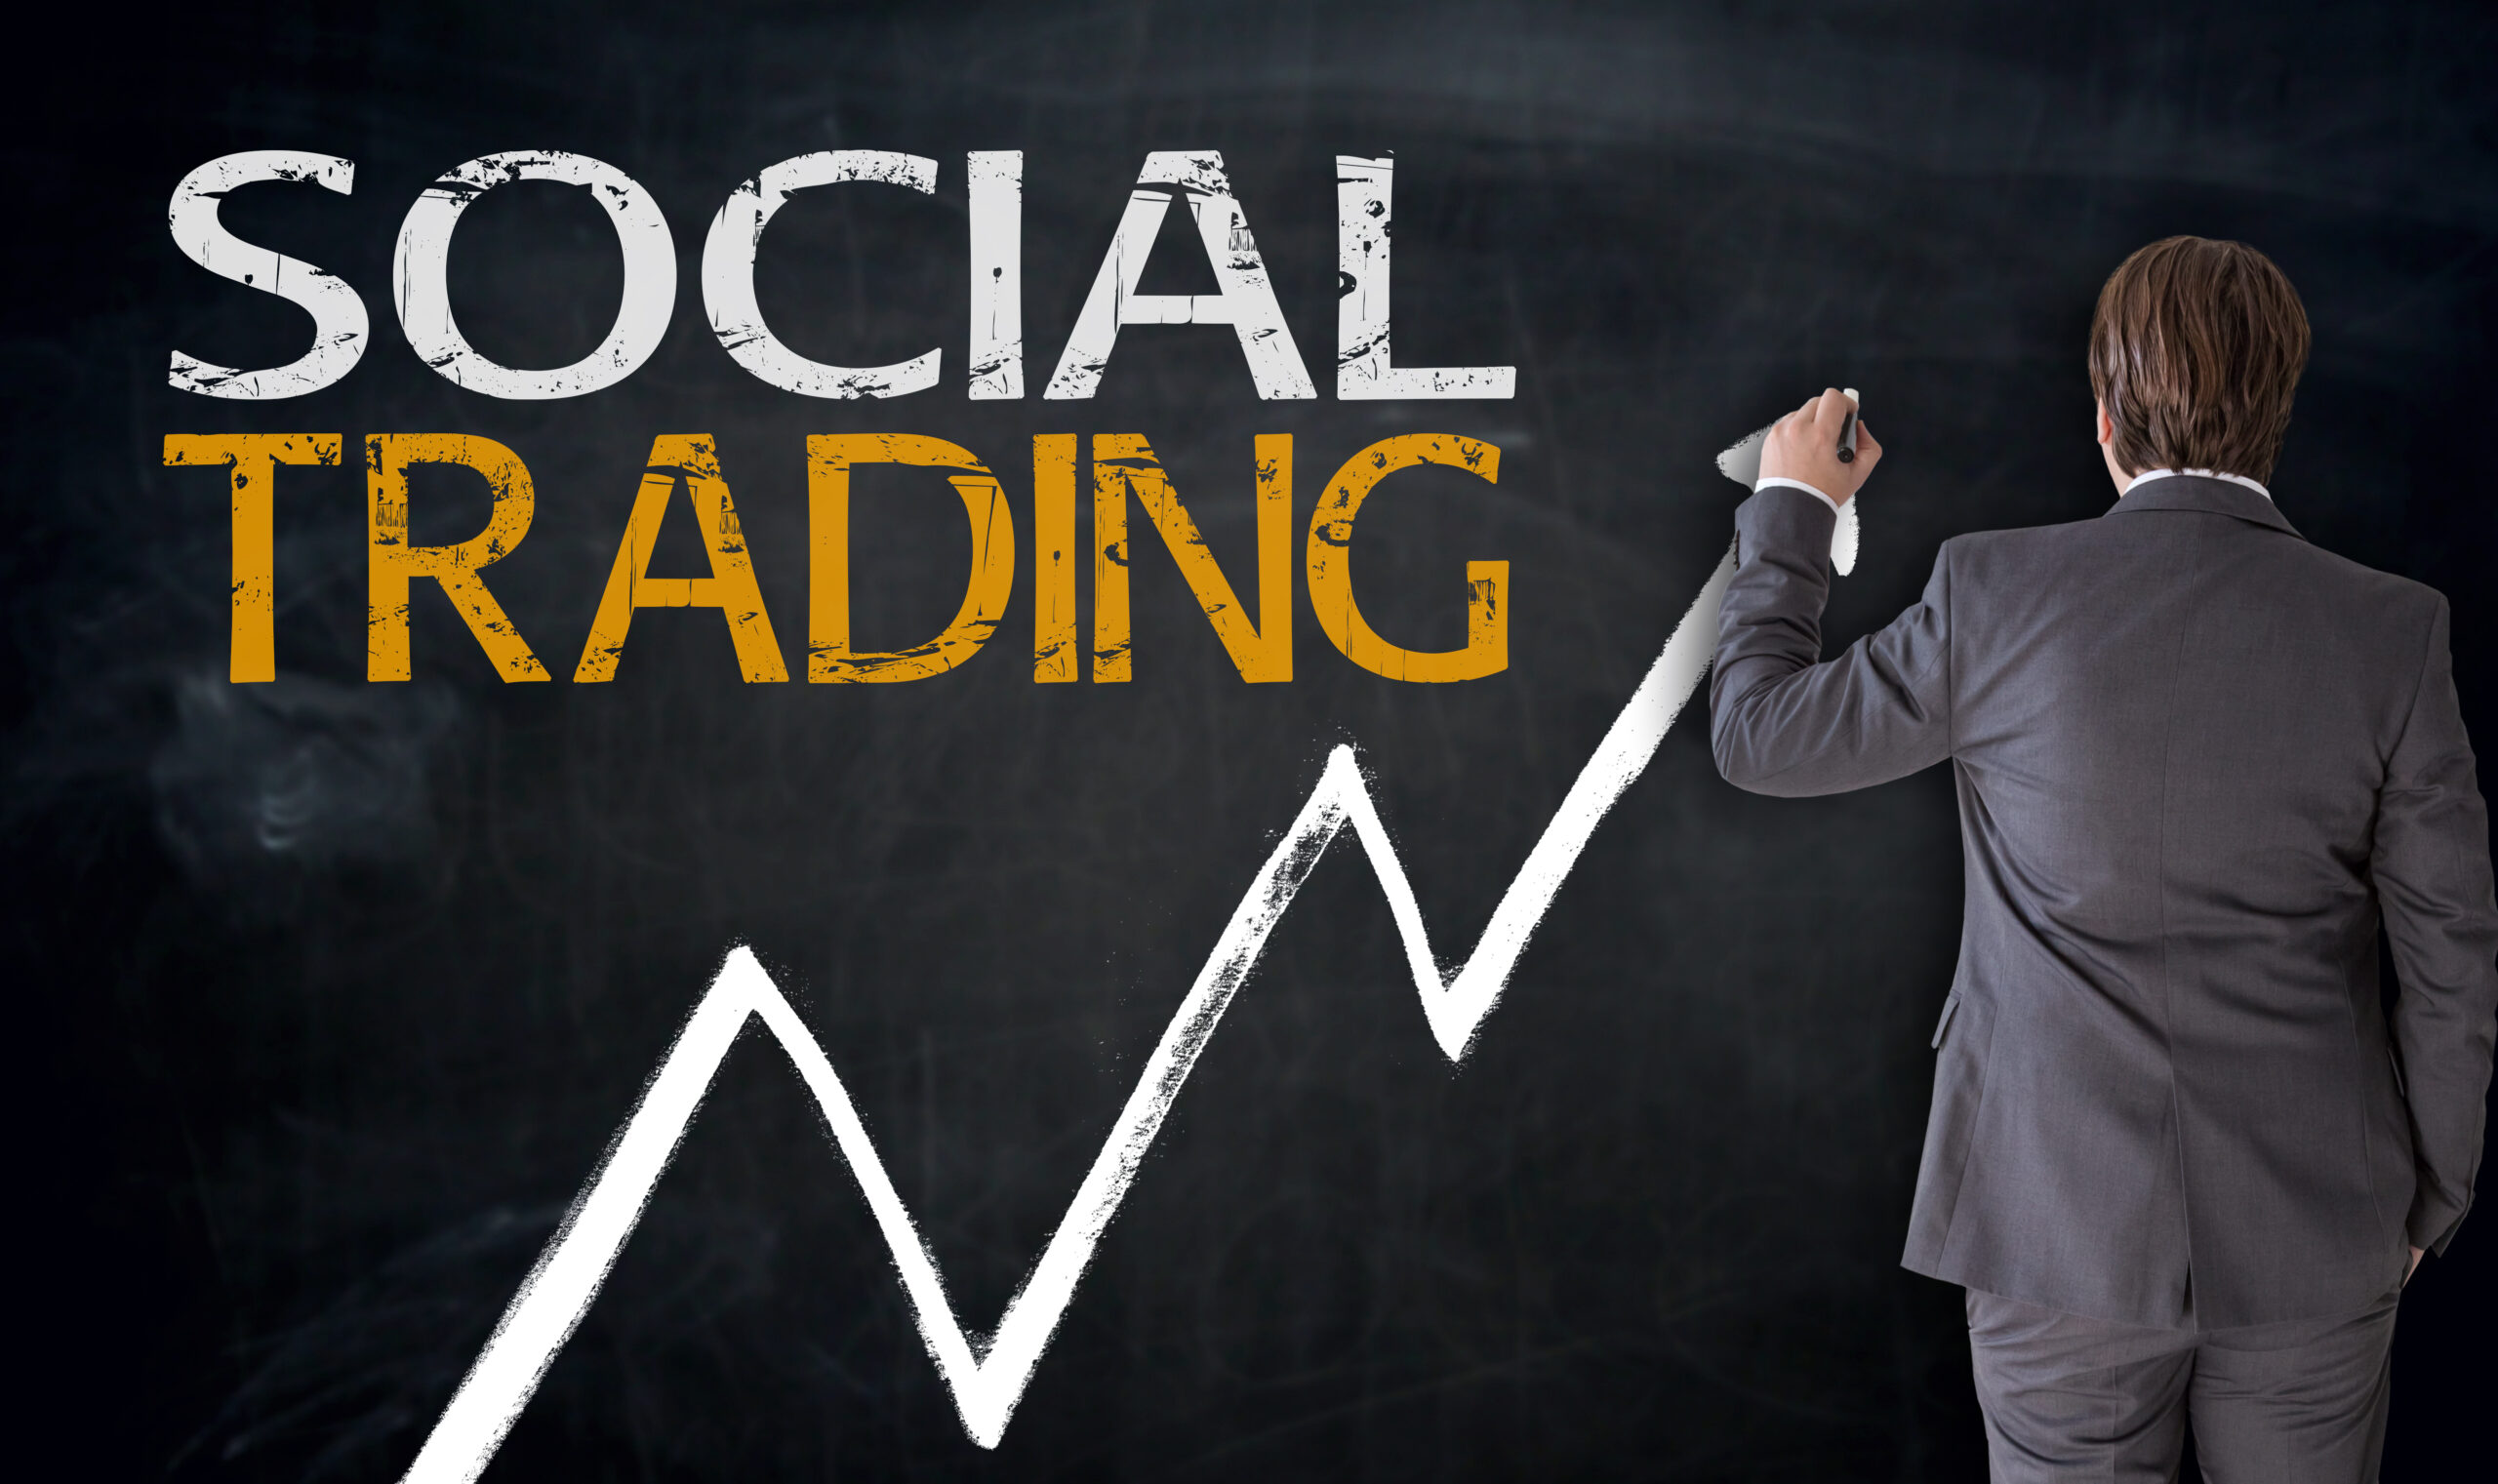 Geek insider, geekinsider, geekinsider. Com,, the role of social trading for online investments, business